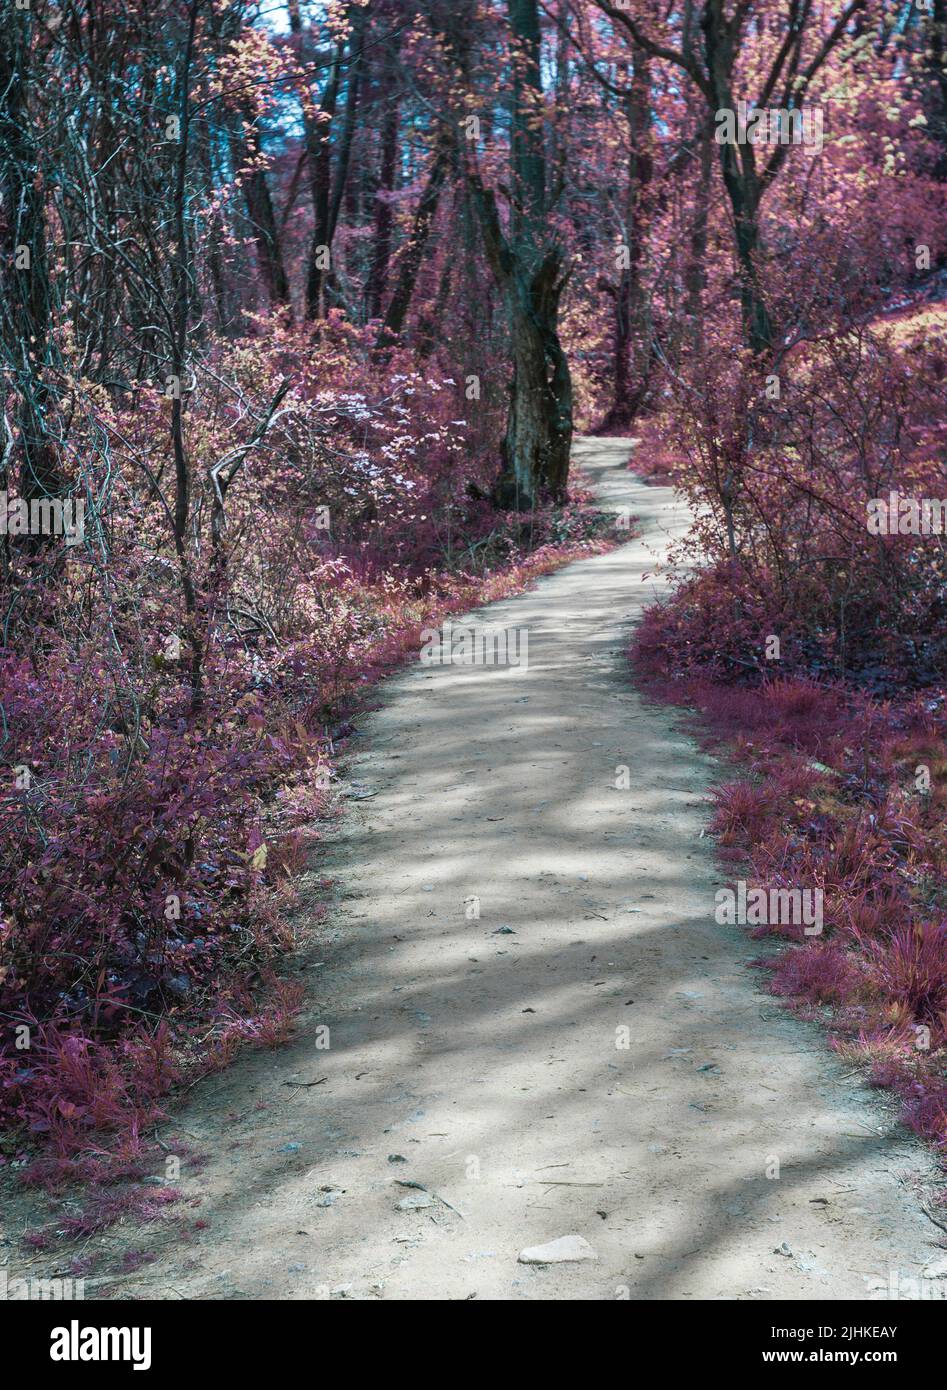 An ordinary trail in the woods looks enchanted in infrared. Stock Photo